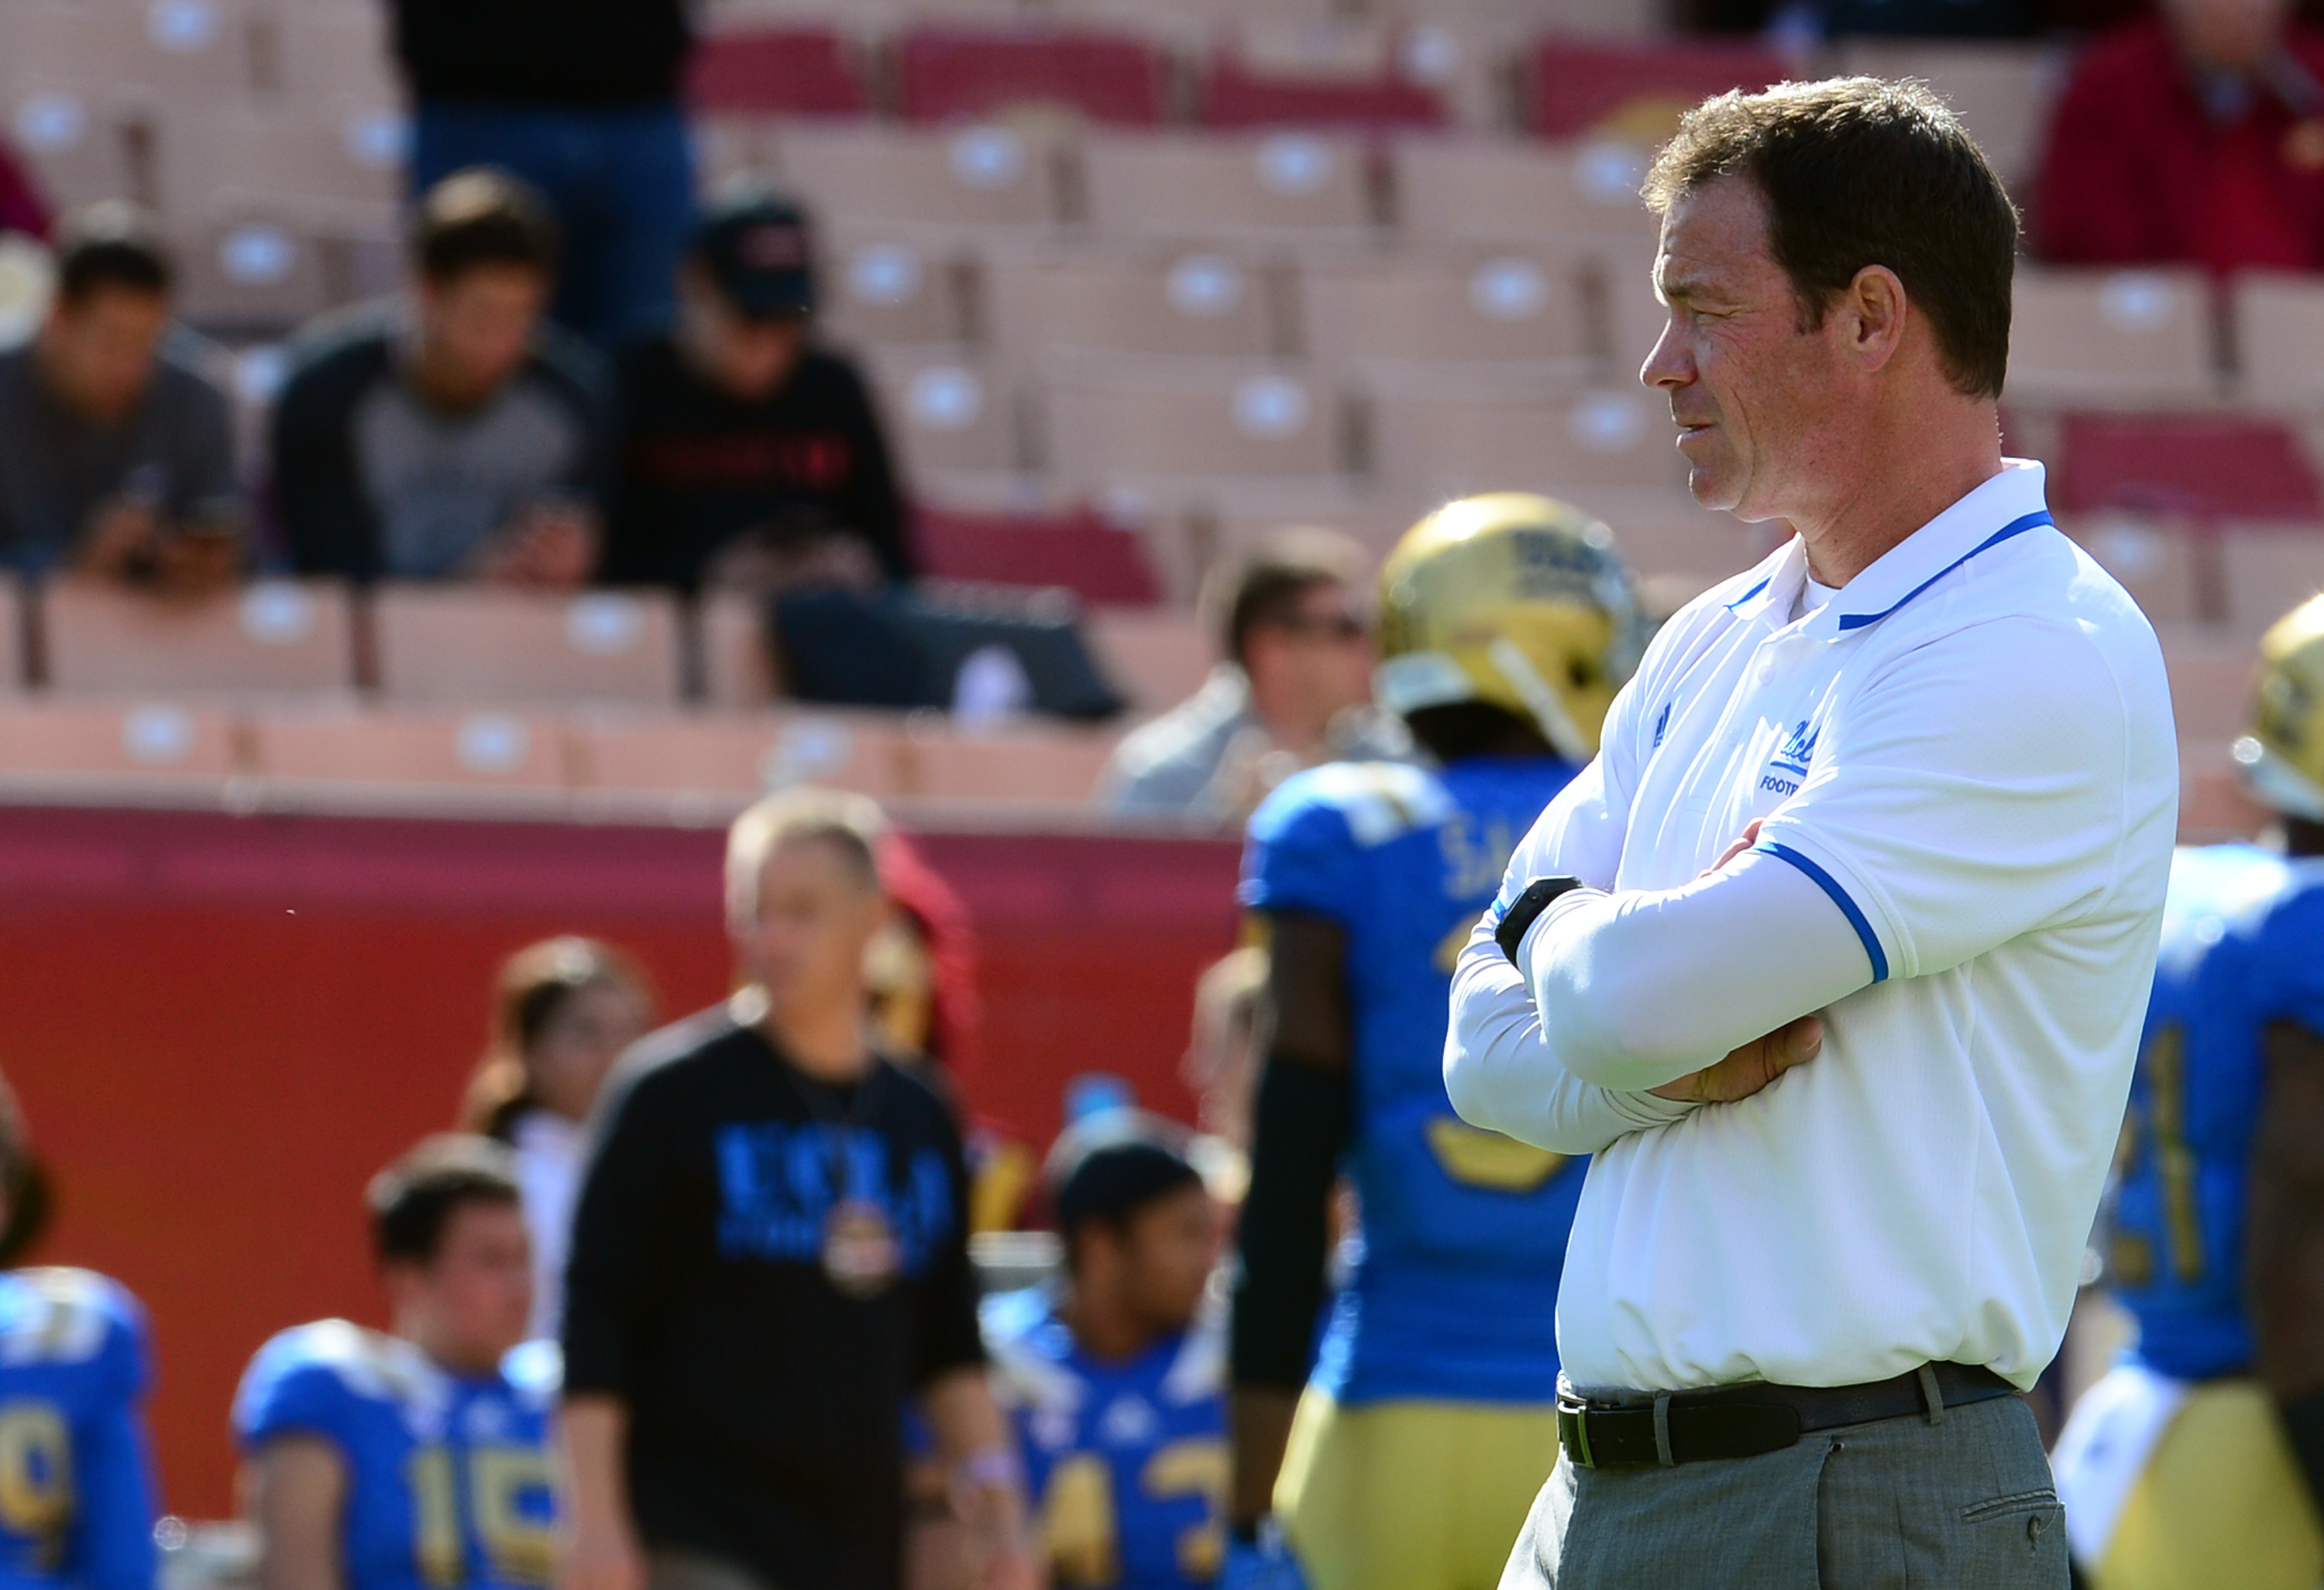 UCLA head coach Jim Mora prior to a NCAA college football game against UCLA in the Los Angeles Memorial Coliseum in Los Angeles, on Saturday, Nov. 28, 2015. (Photo by Keith Birmingham/ Pasadena Star-News)